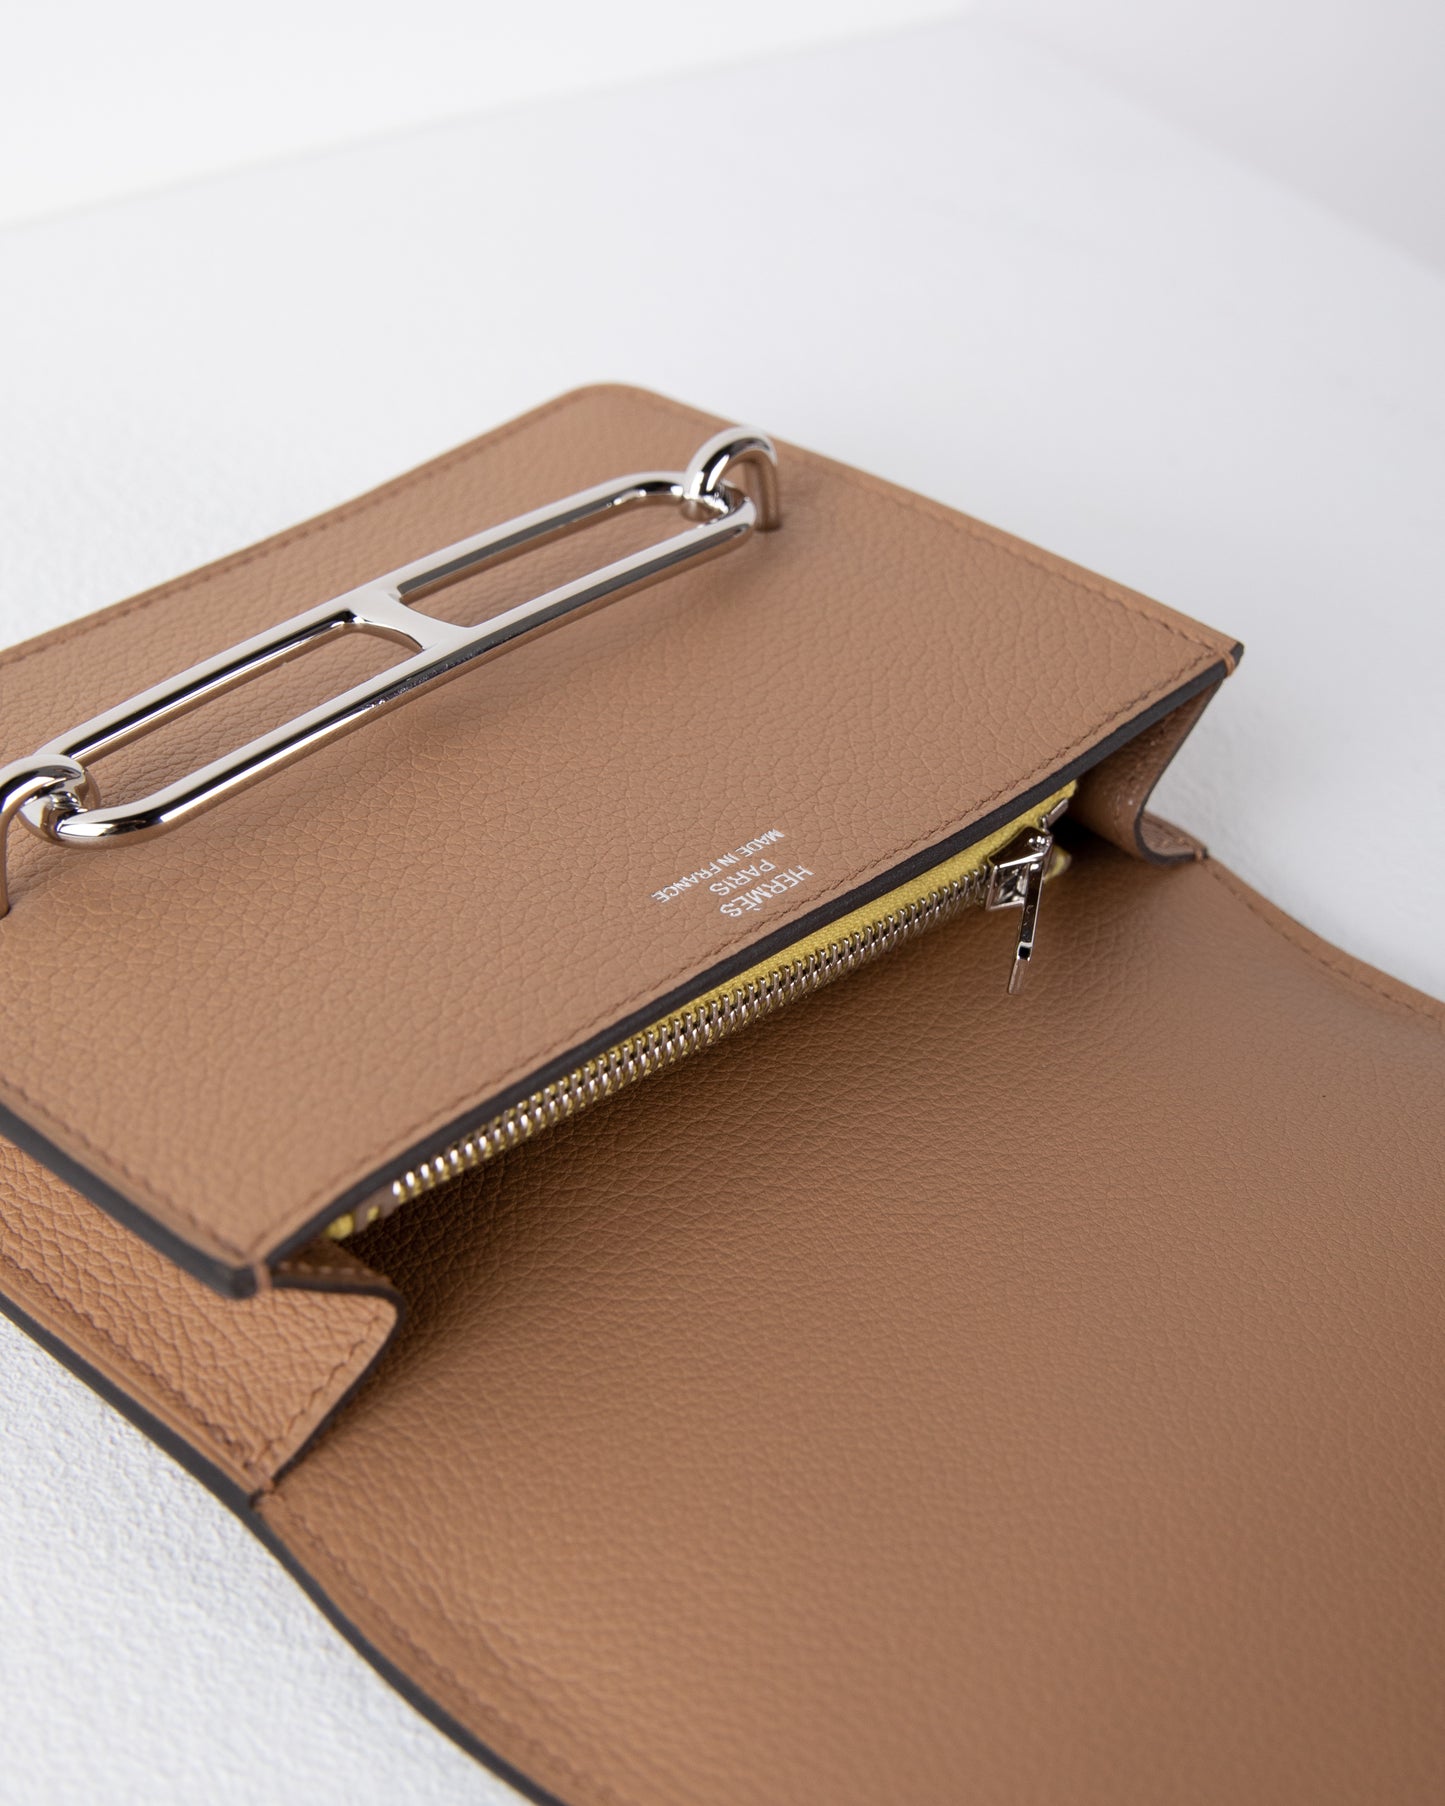 Roulis Slim Compact Wallet in Chai/Lime Evercolor Leather with Palladium Hardware